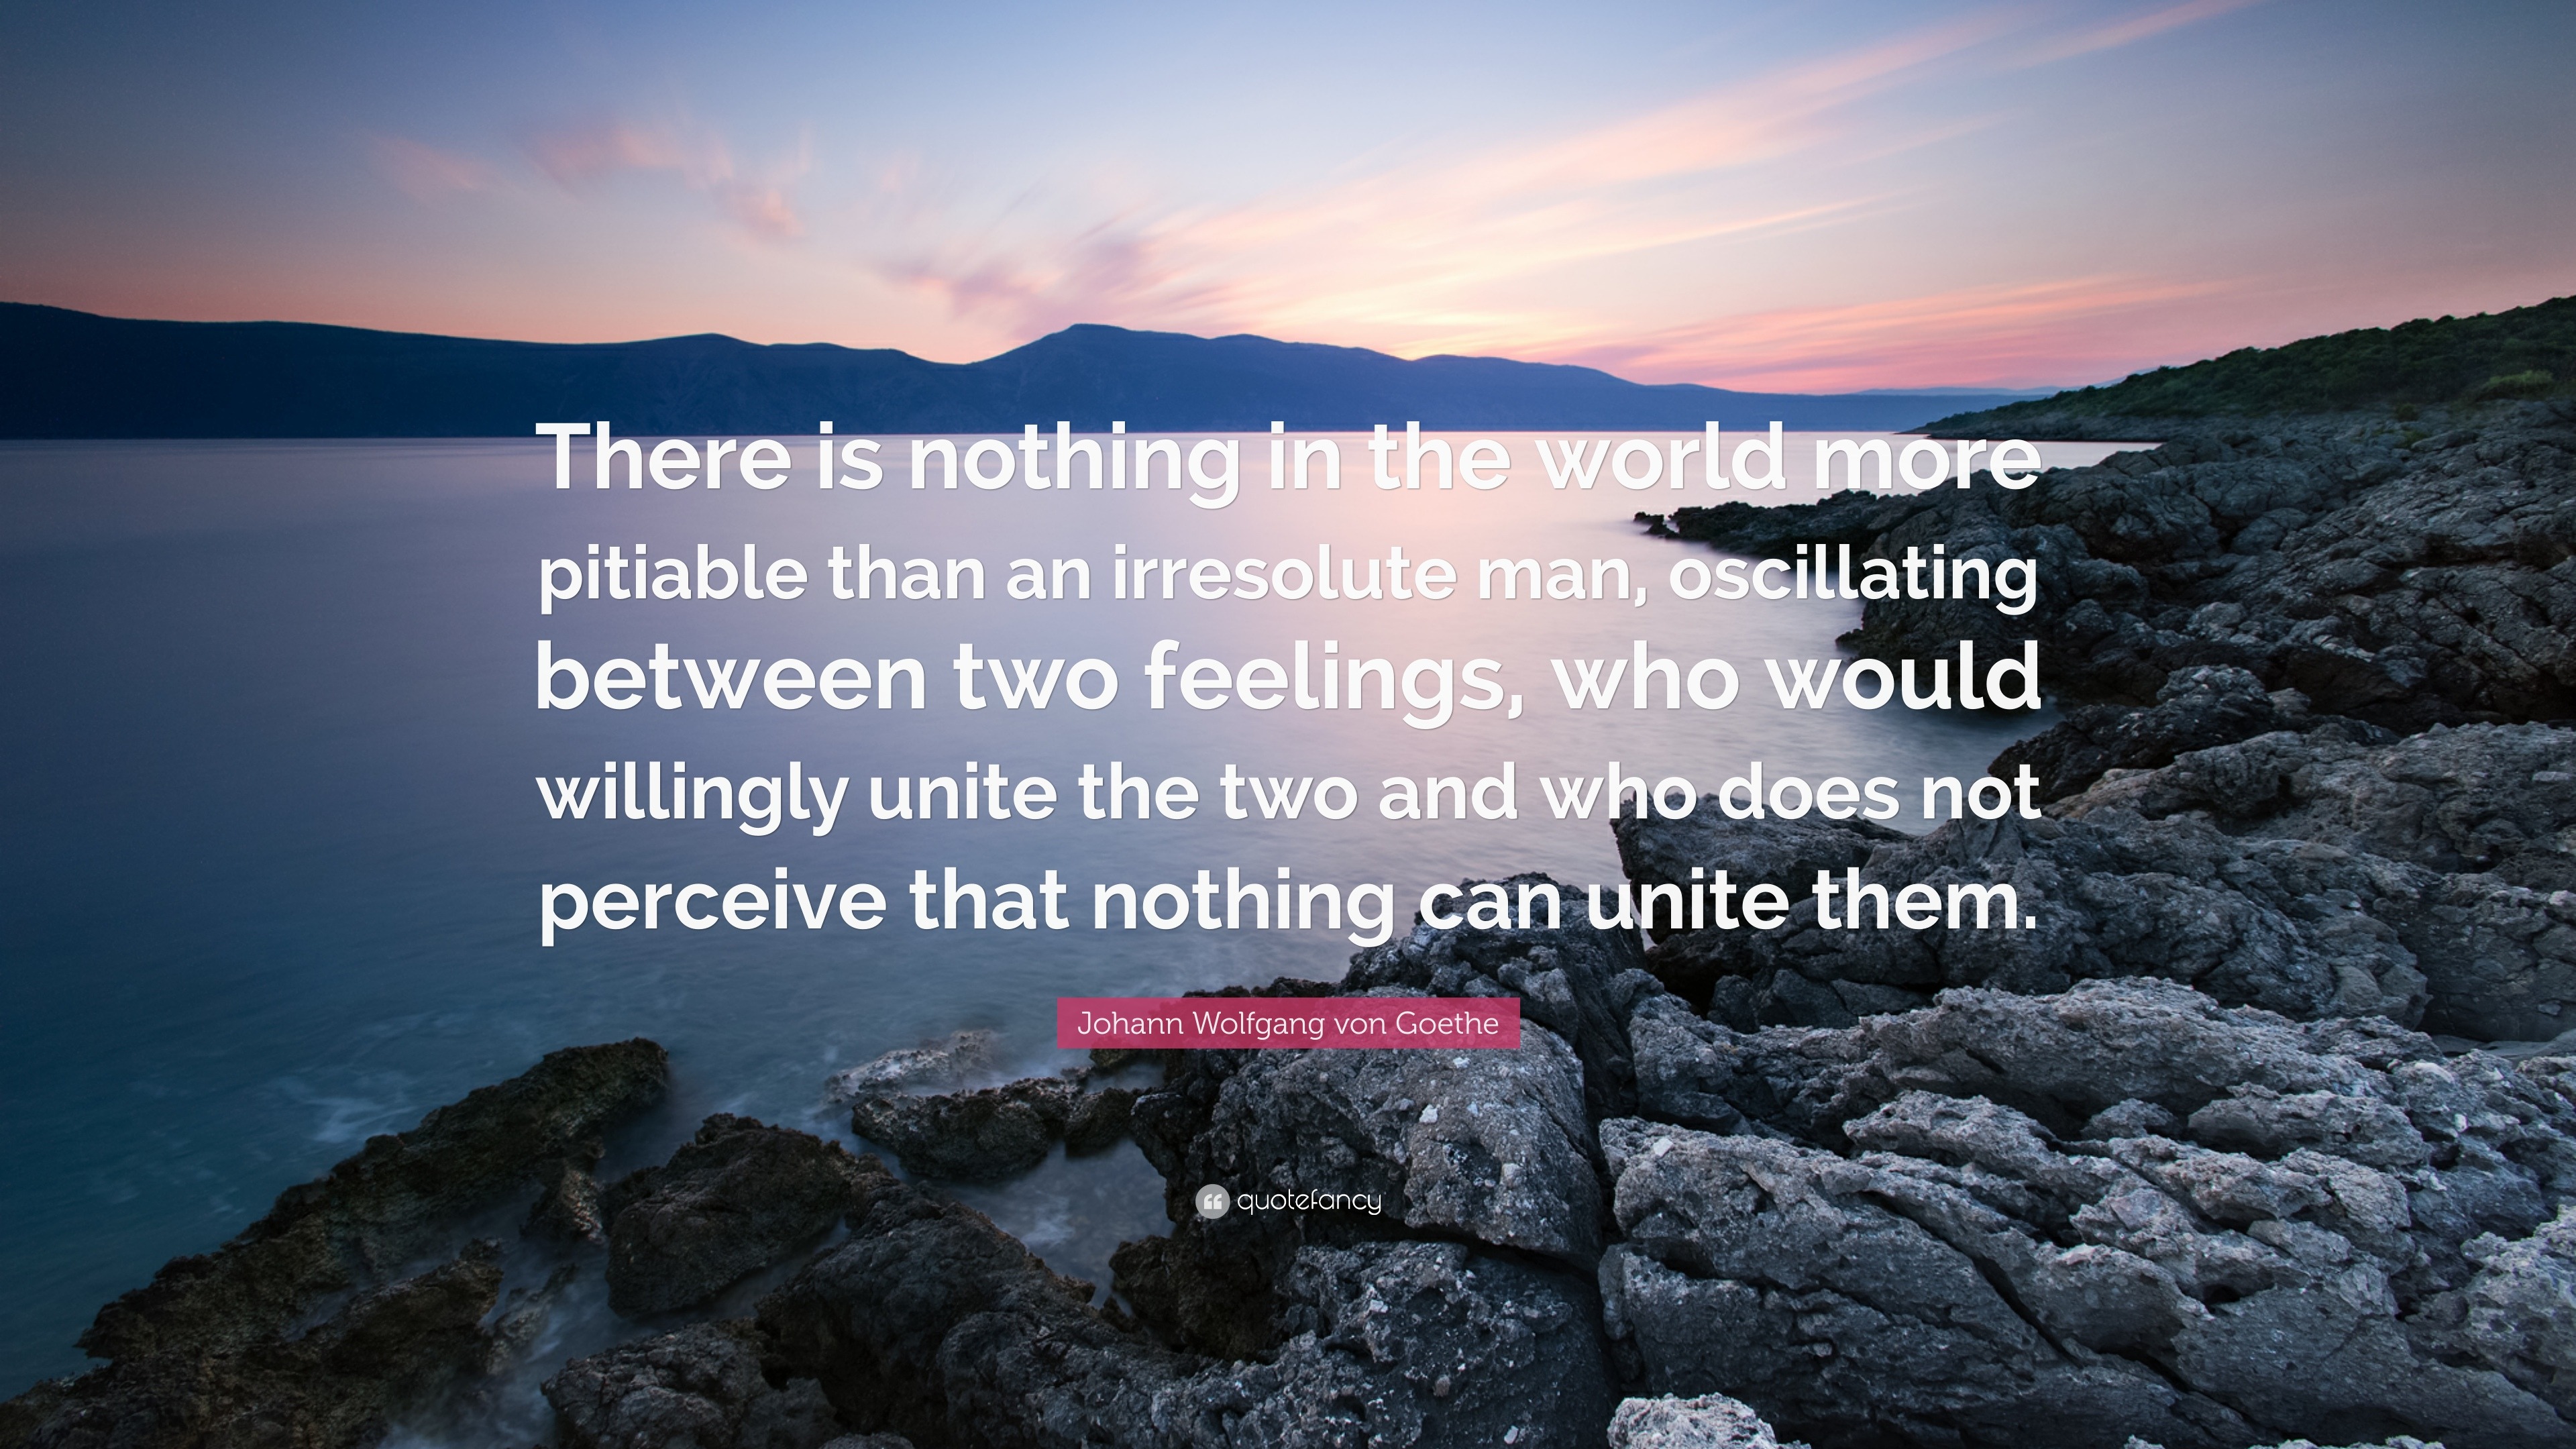 Johann Wolfgang von Goethe Quote: “There is nothing in the world more ...